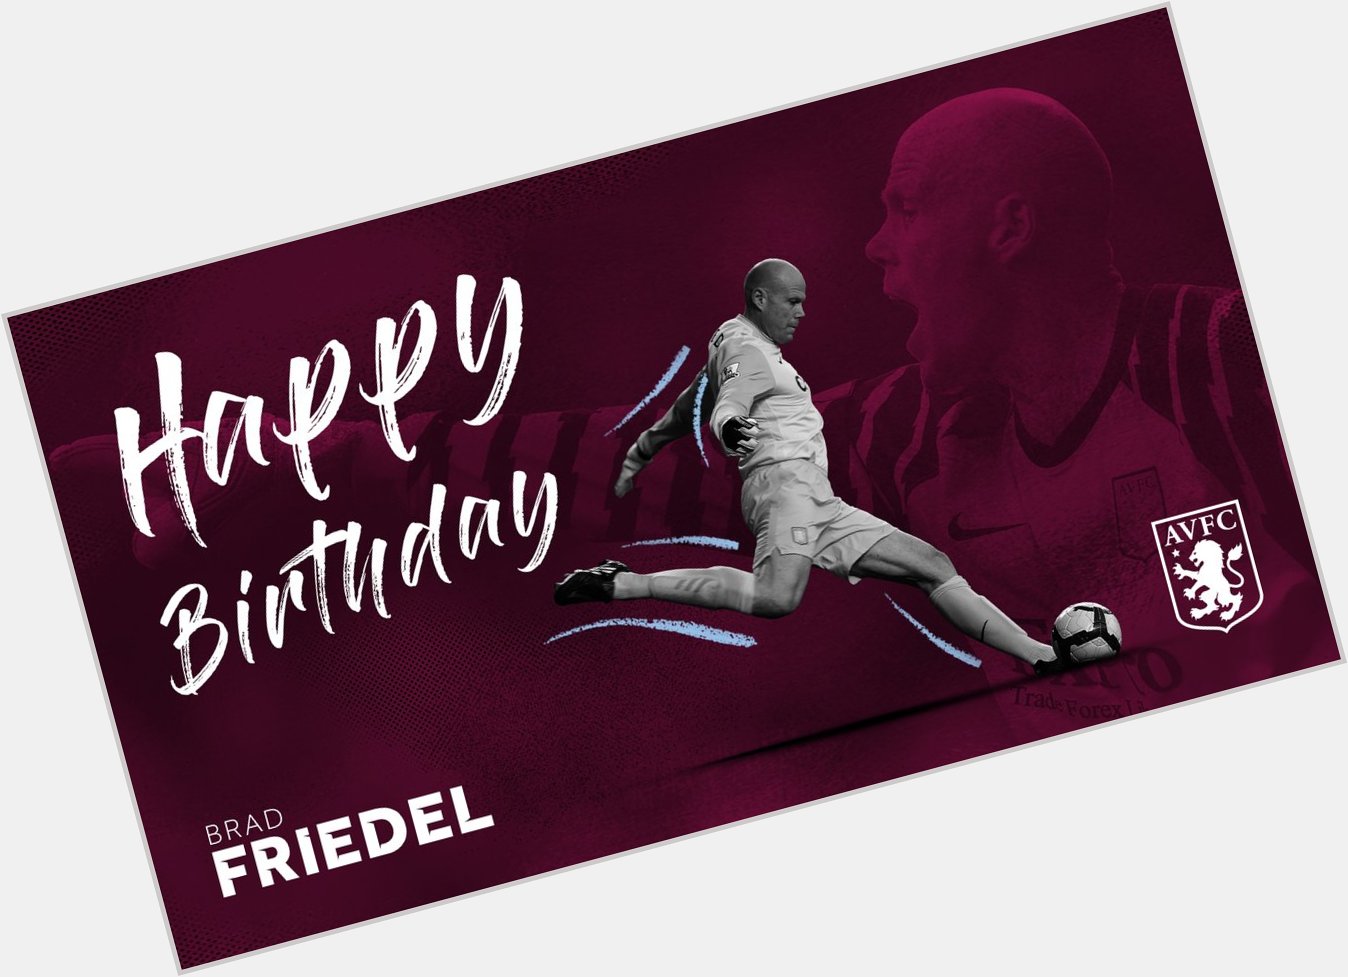 We\re also wishing a happy birthday to our former \keeper, Brad Friedel!  